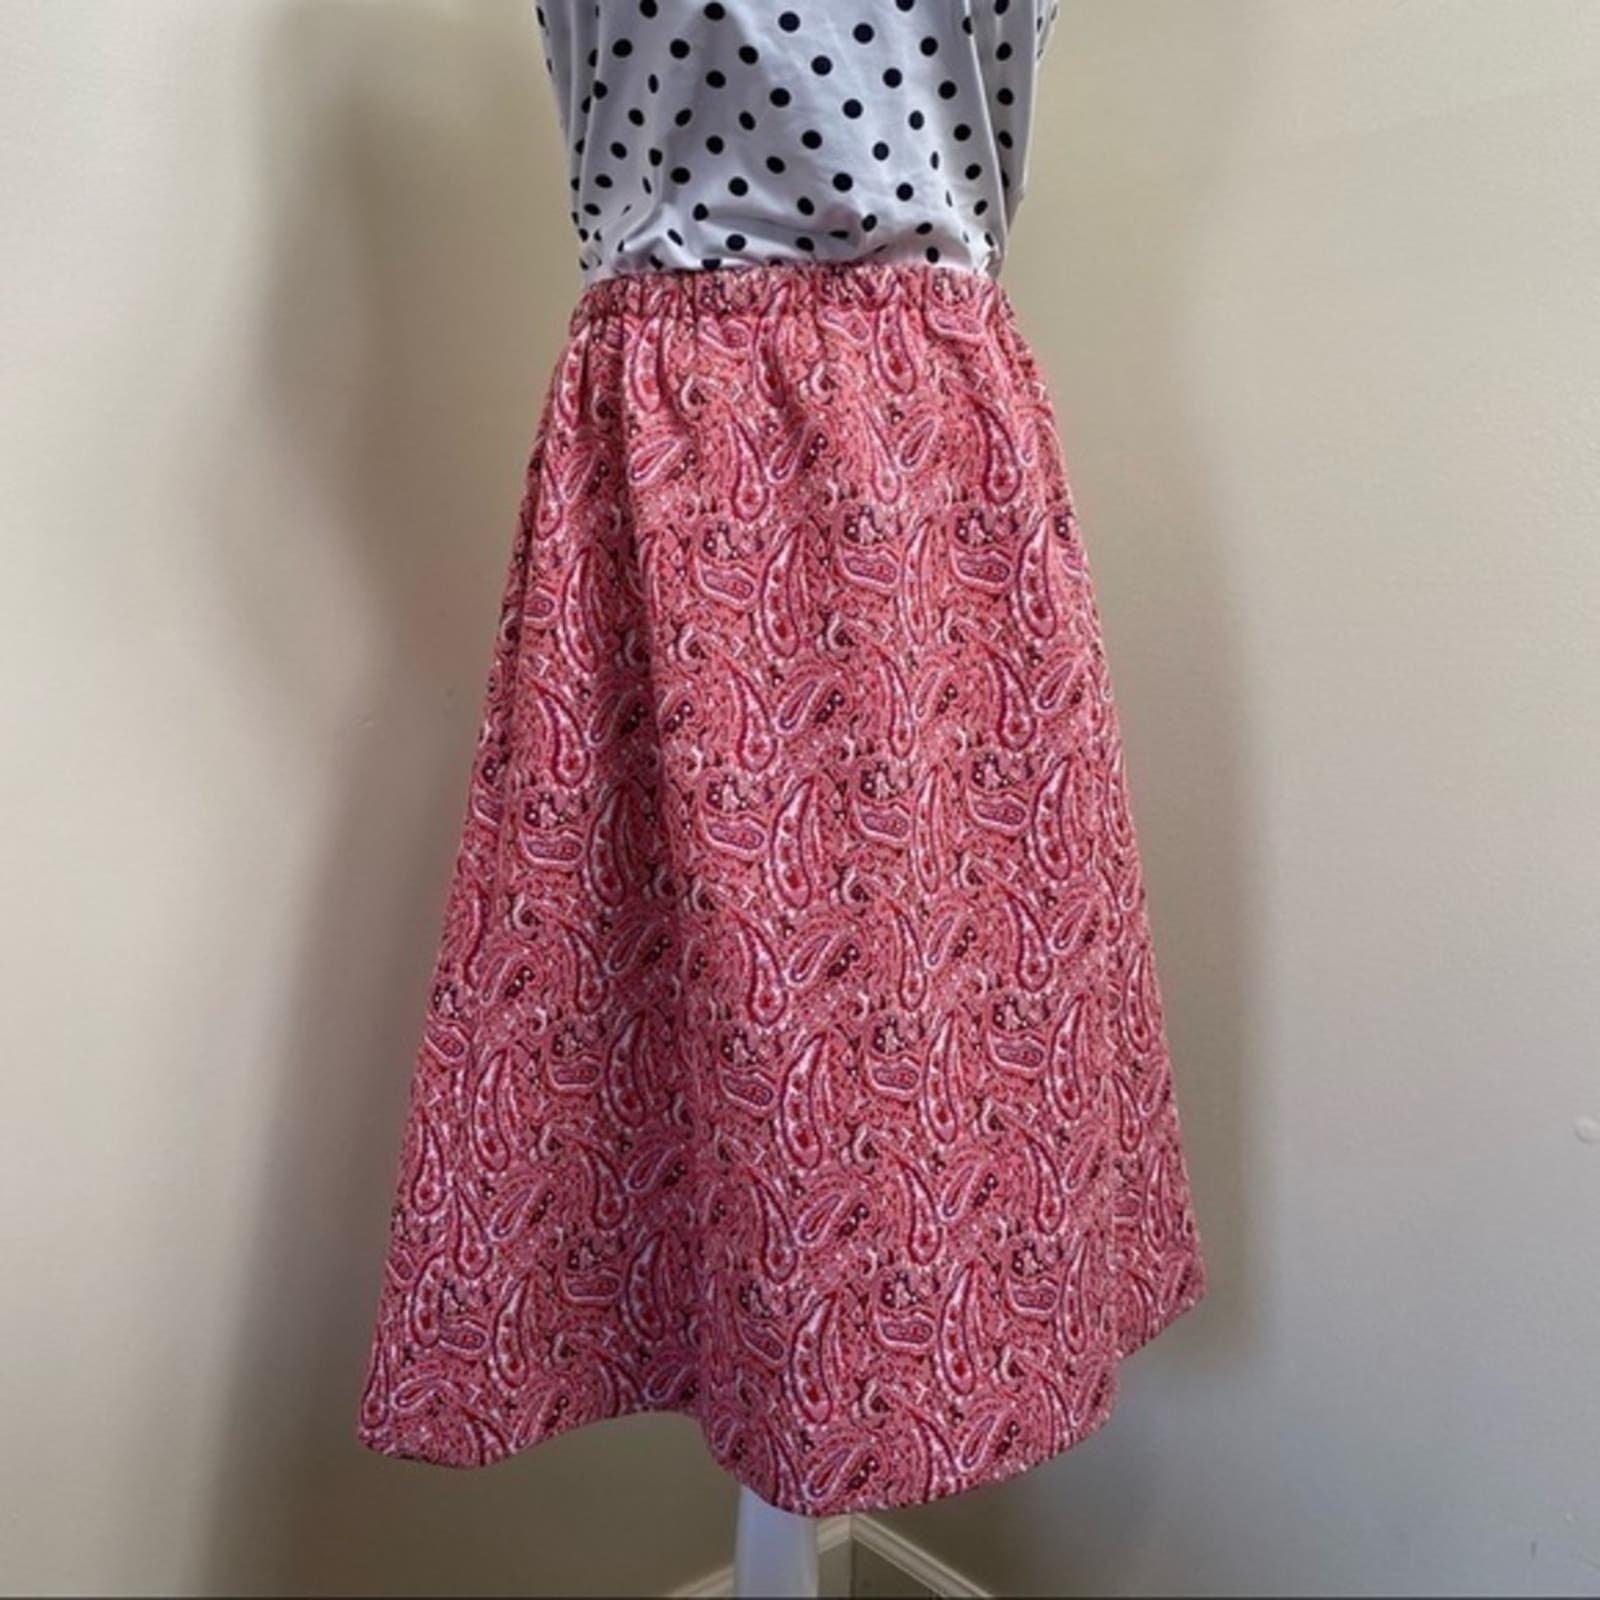 Authentic Handmade 60s paisley skirt. Small medium. Large. GrNMwXznG best sale